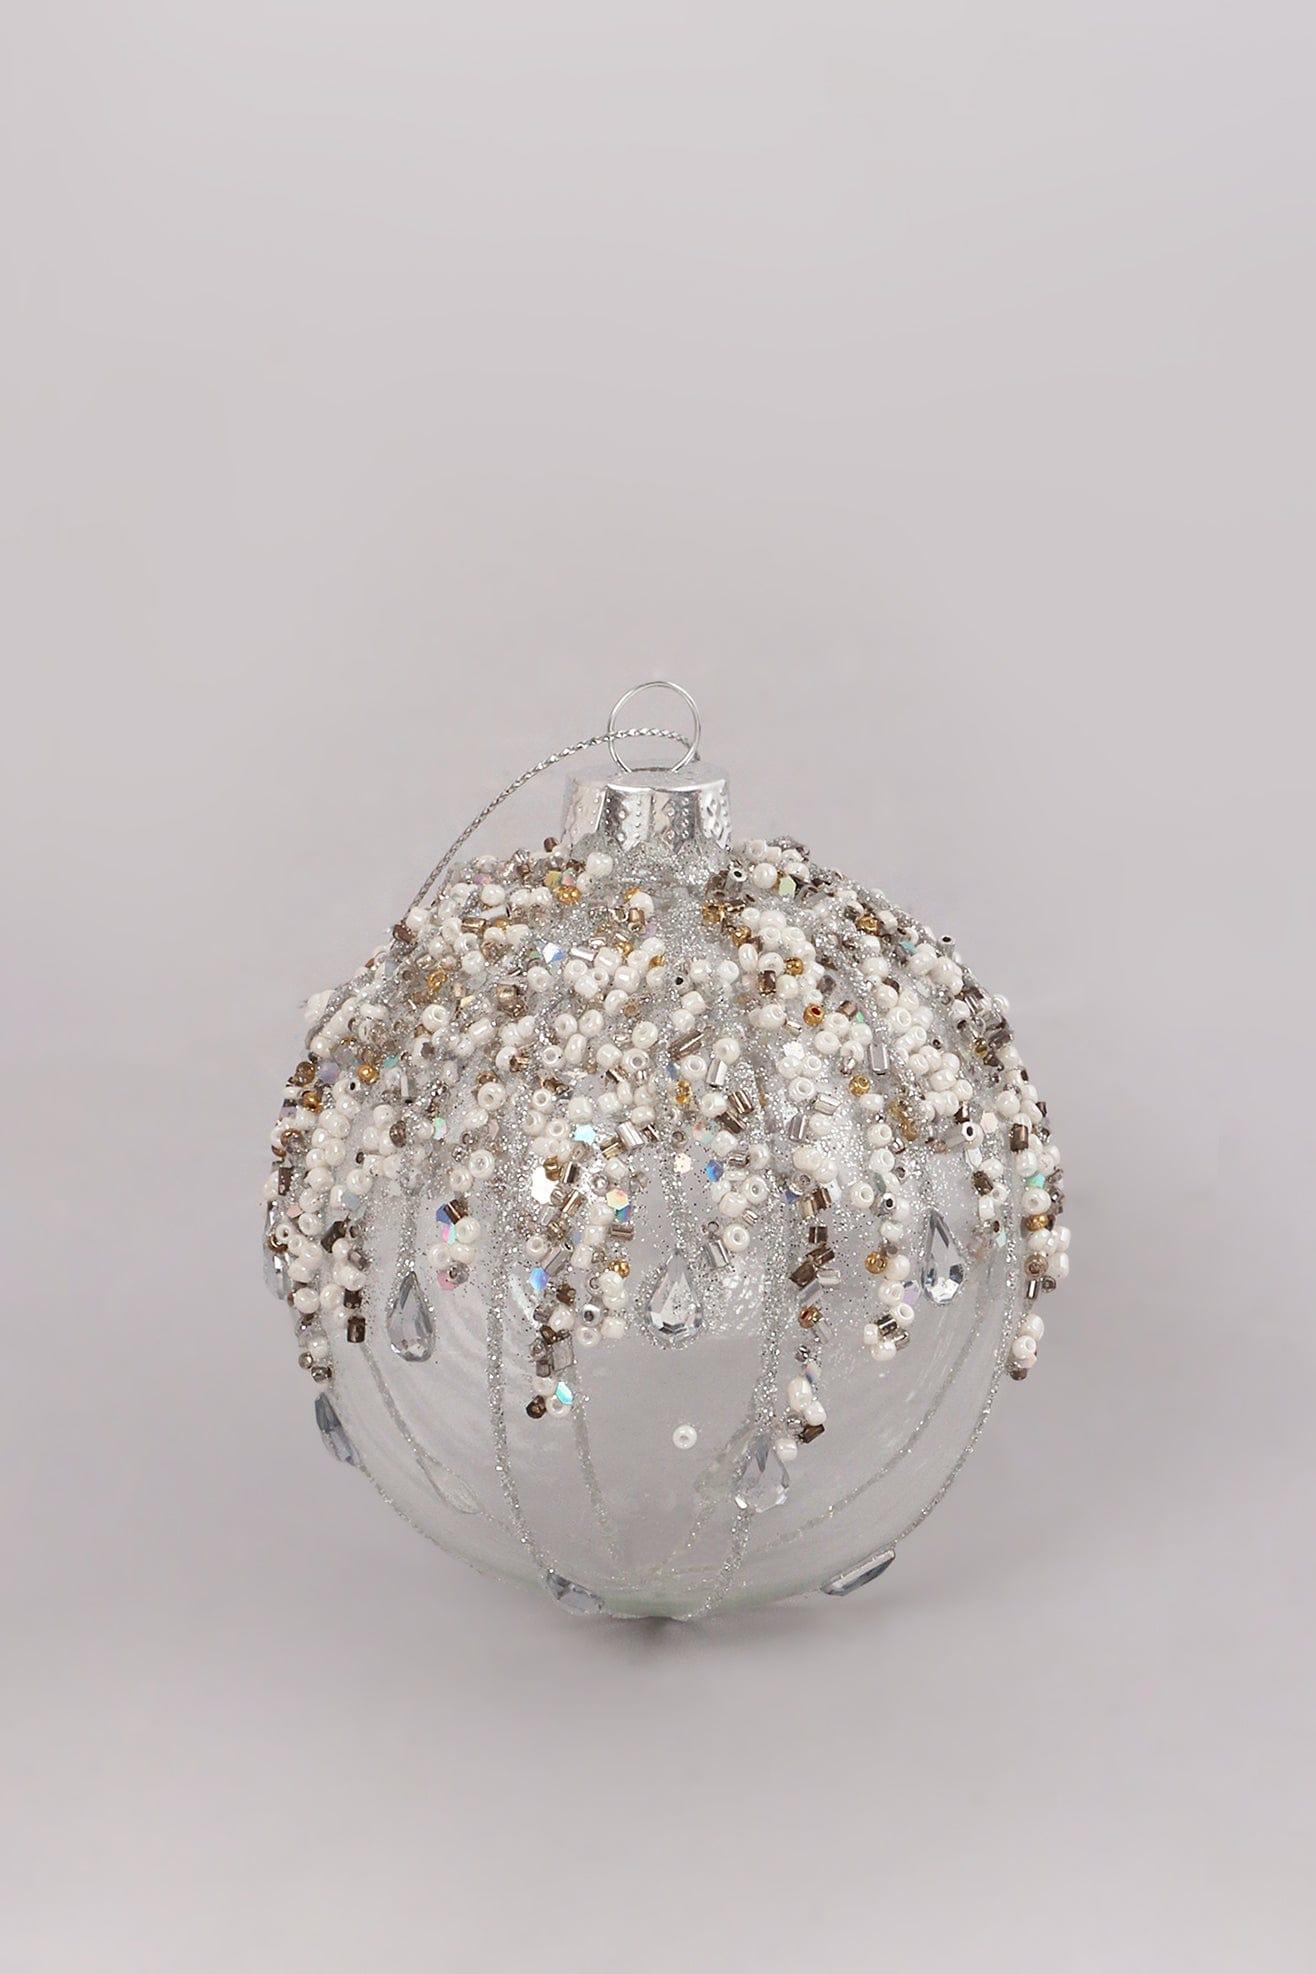 G Decor Christmas Decorations White Glass Bauble with Beads and Silver Frosted Glass Bauble with Snowflake Design